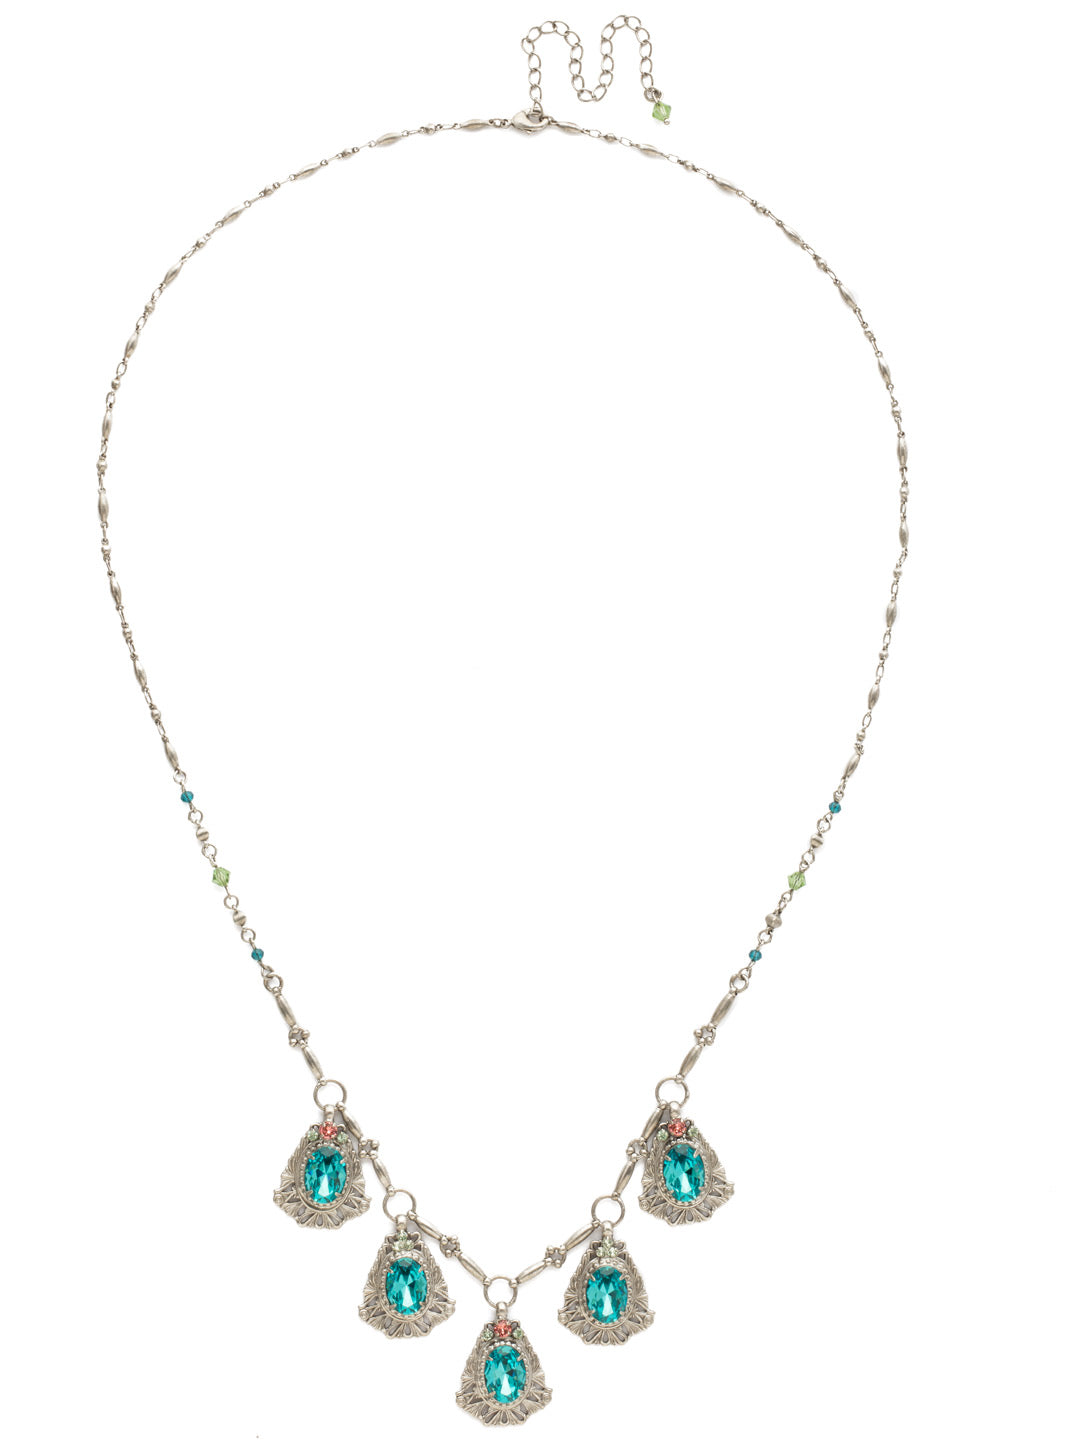 Aconitum Necklace - NDS4ASVH - <p>Five ornate metal findings showcase an oval cut crystal topped with petite rounds. A delicate beaded chain adds all-around allure. From Sorrelli's Vivid Horizons collection in our Antique Silver-tone finish.</p>